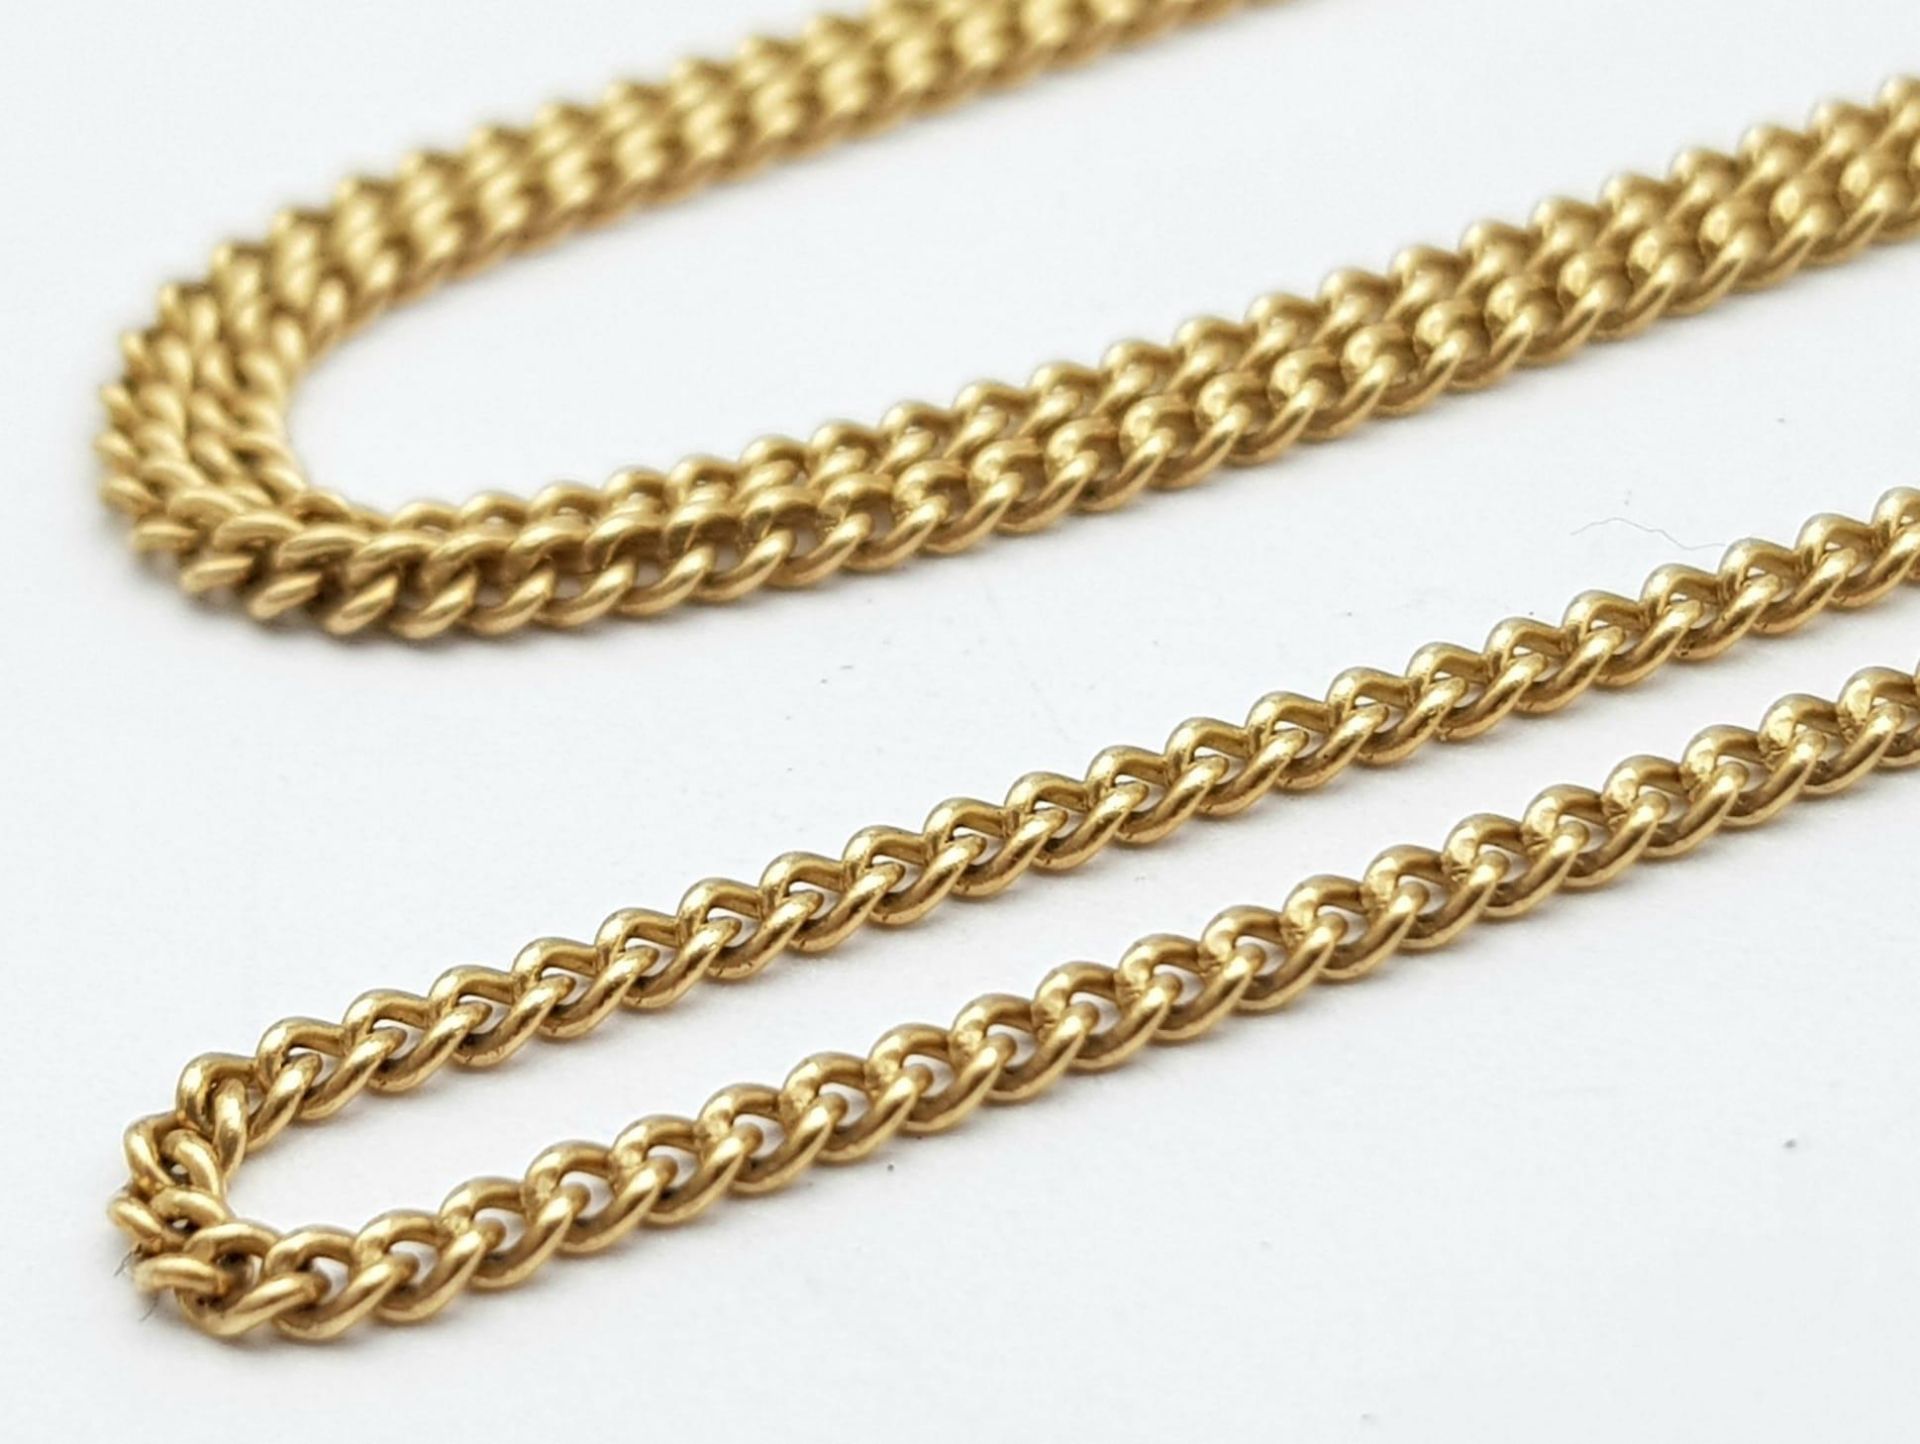 A 9K Yellow Gold Small Curb Link Necklace. 50cm length. 3.66g weight. - Image 2 of 4